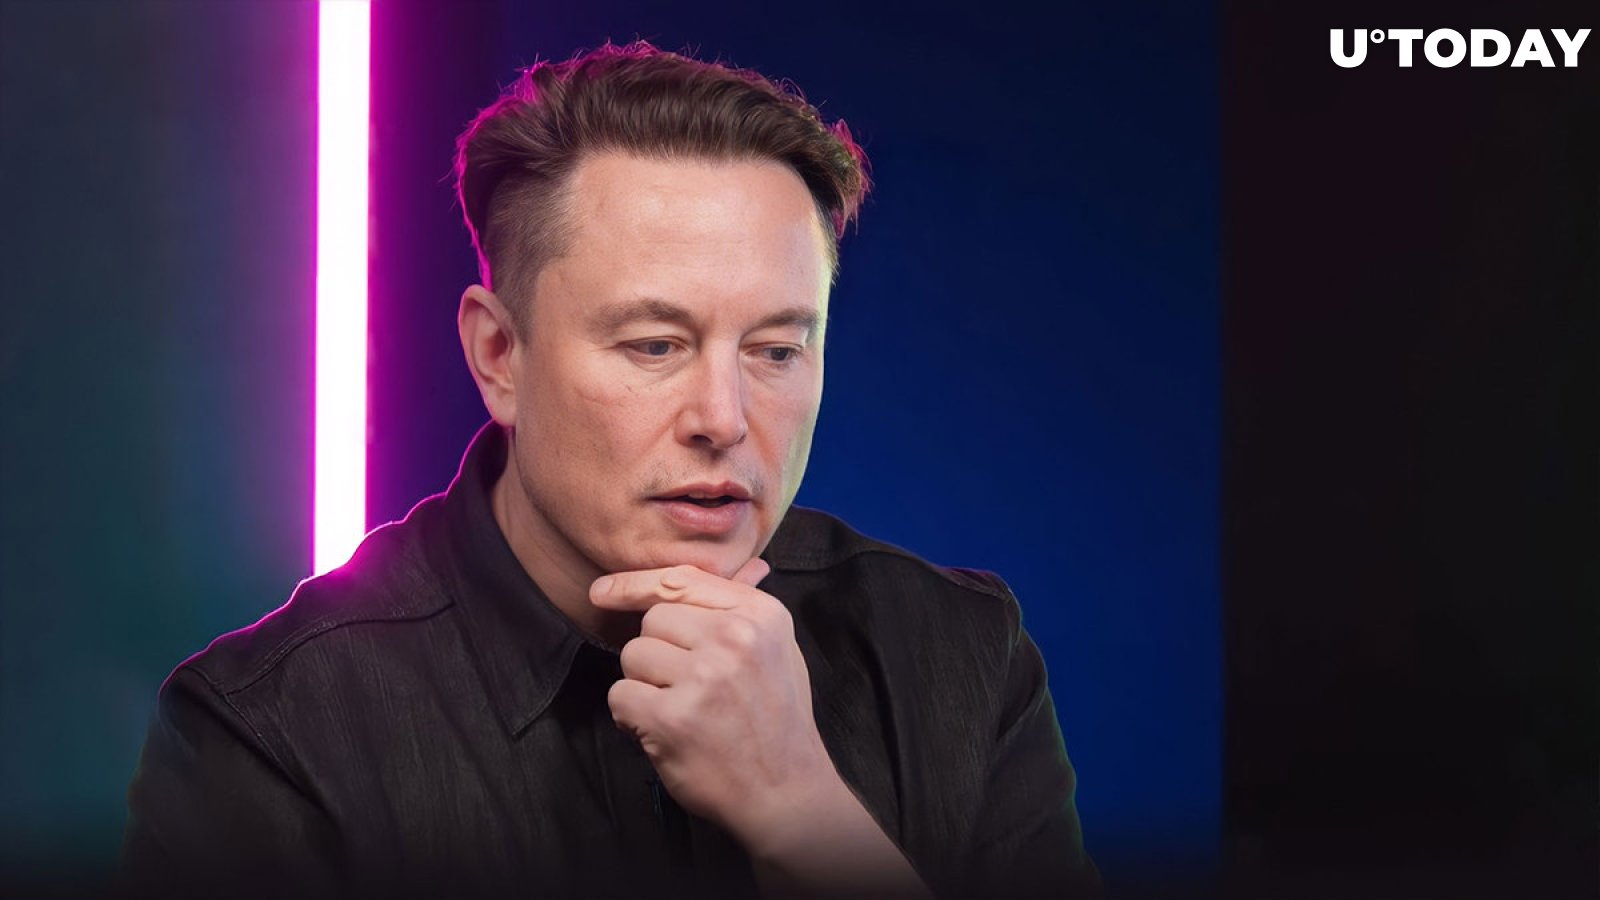 Elon Musk: 'I Don't Spend Much Time Thinking About Cryptocurrency' but Here's Catch